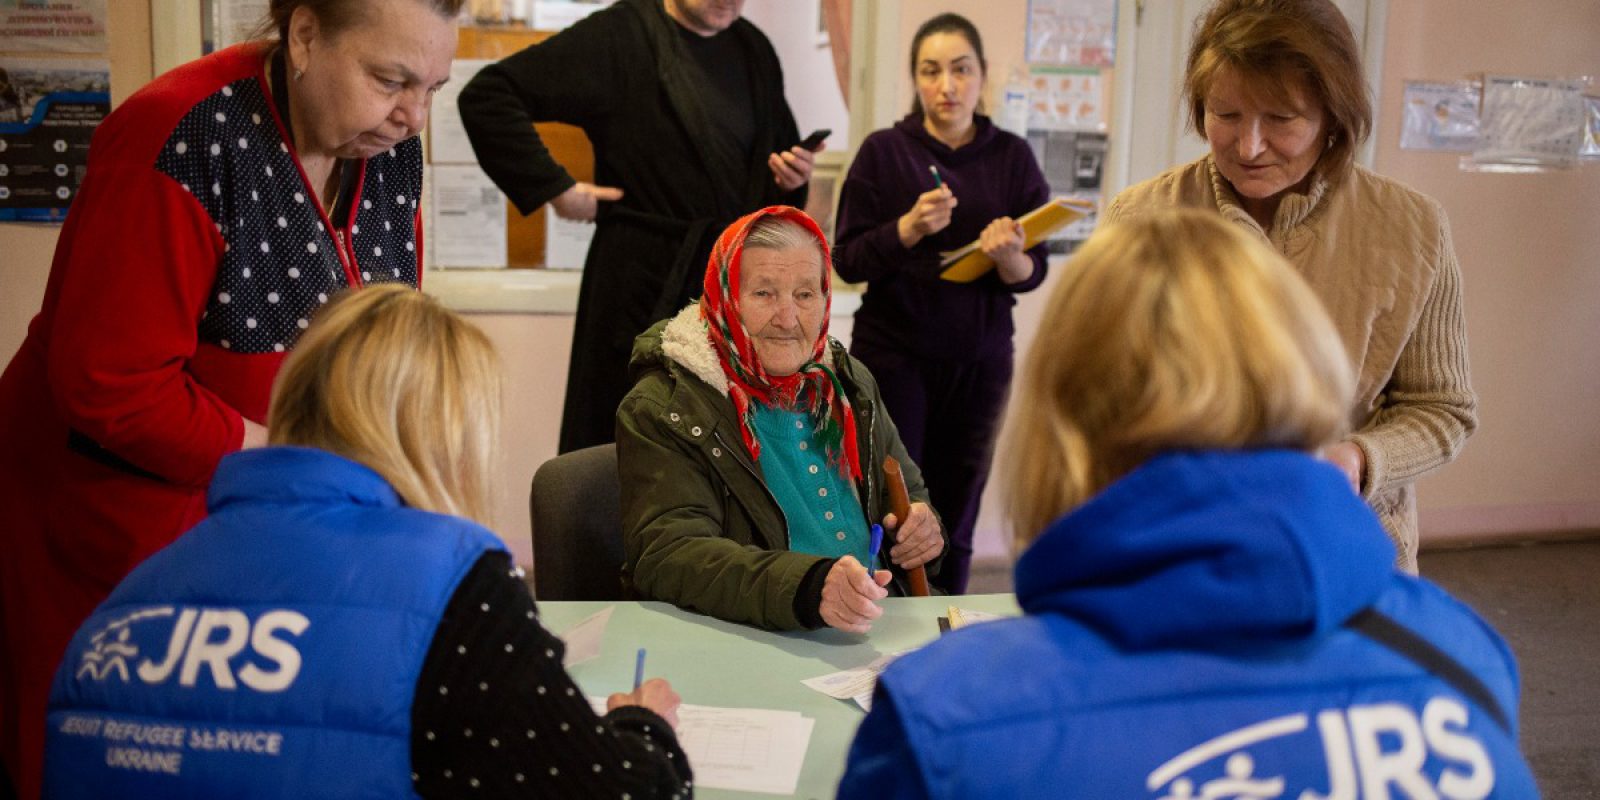 After two years of conflict in Ukraine, JRS with Jesuit partners, is committed to providing long-term support to people fleeing violence. JRS team in Ukraine providing support to people on the ground after two years of conflict (Sergi Camara/Jesuit Refugee Service)